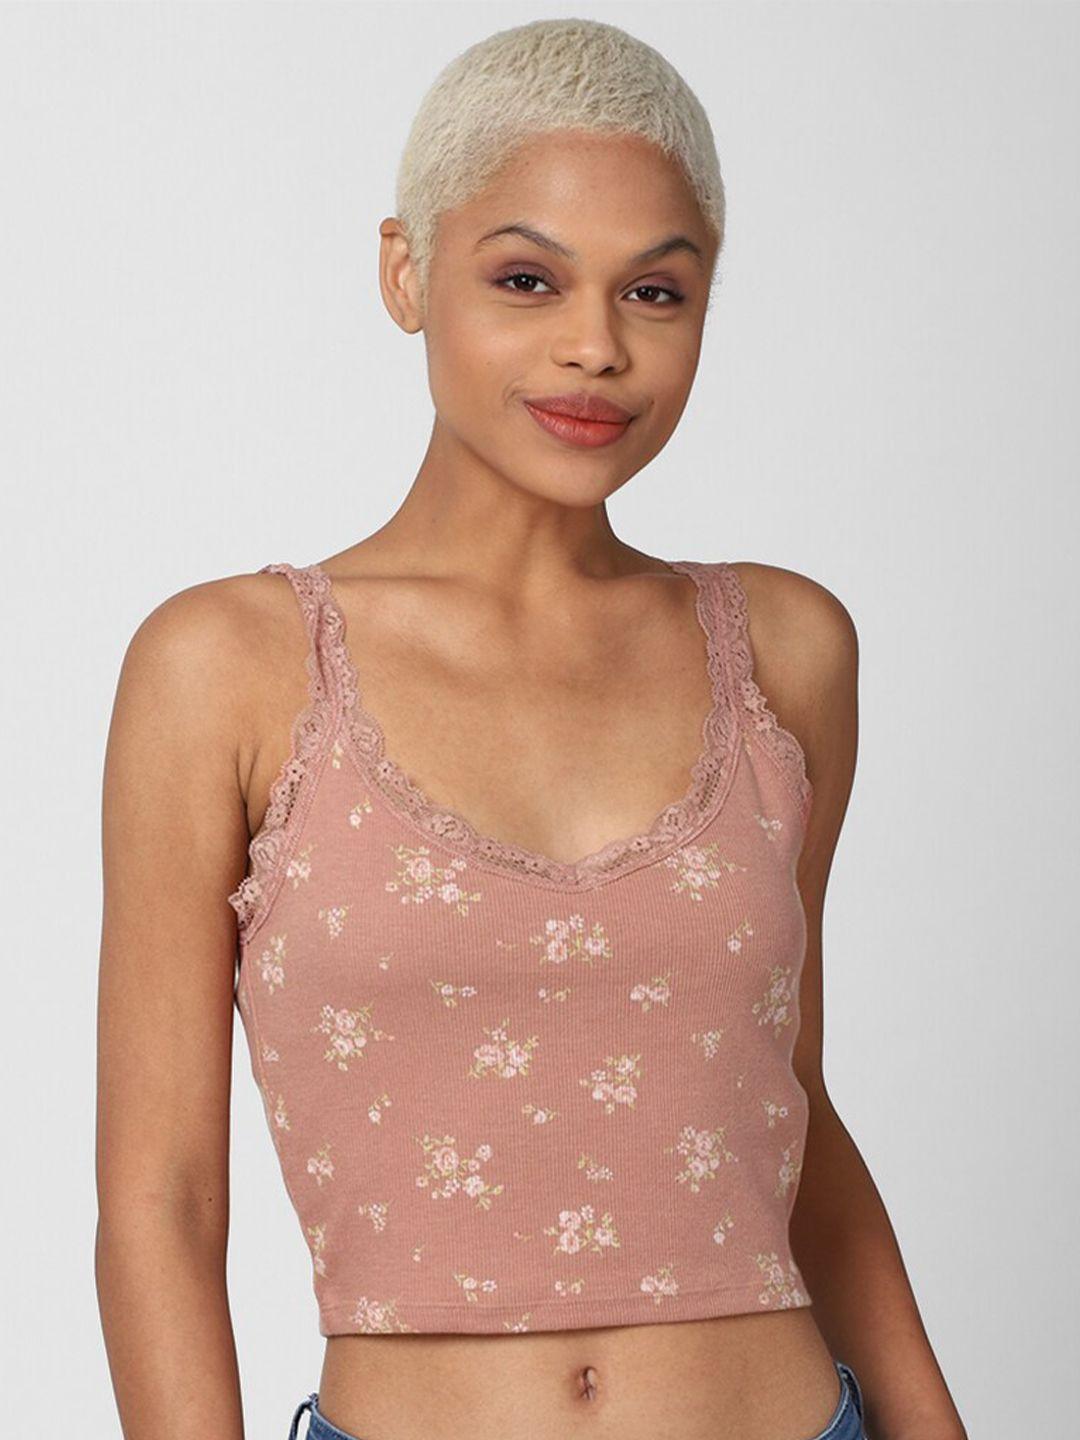 forever-21-women-rose-&-white-floral-print-fitted-crop-top